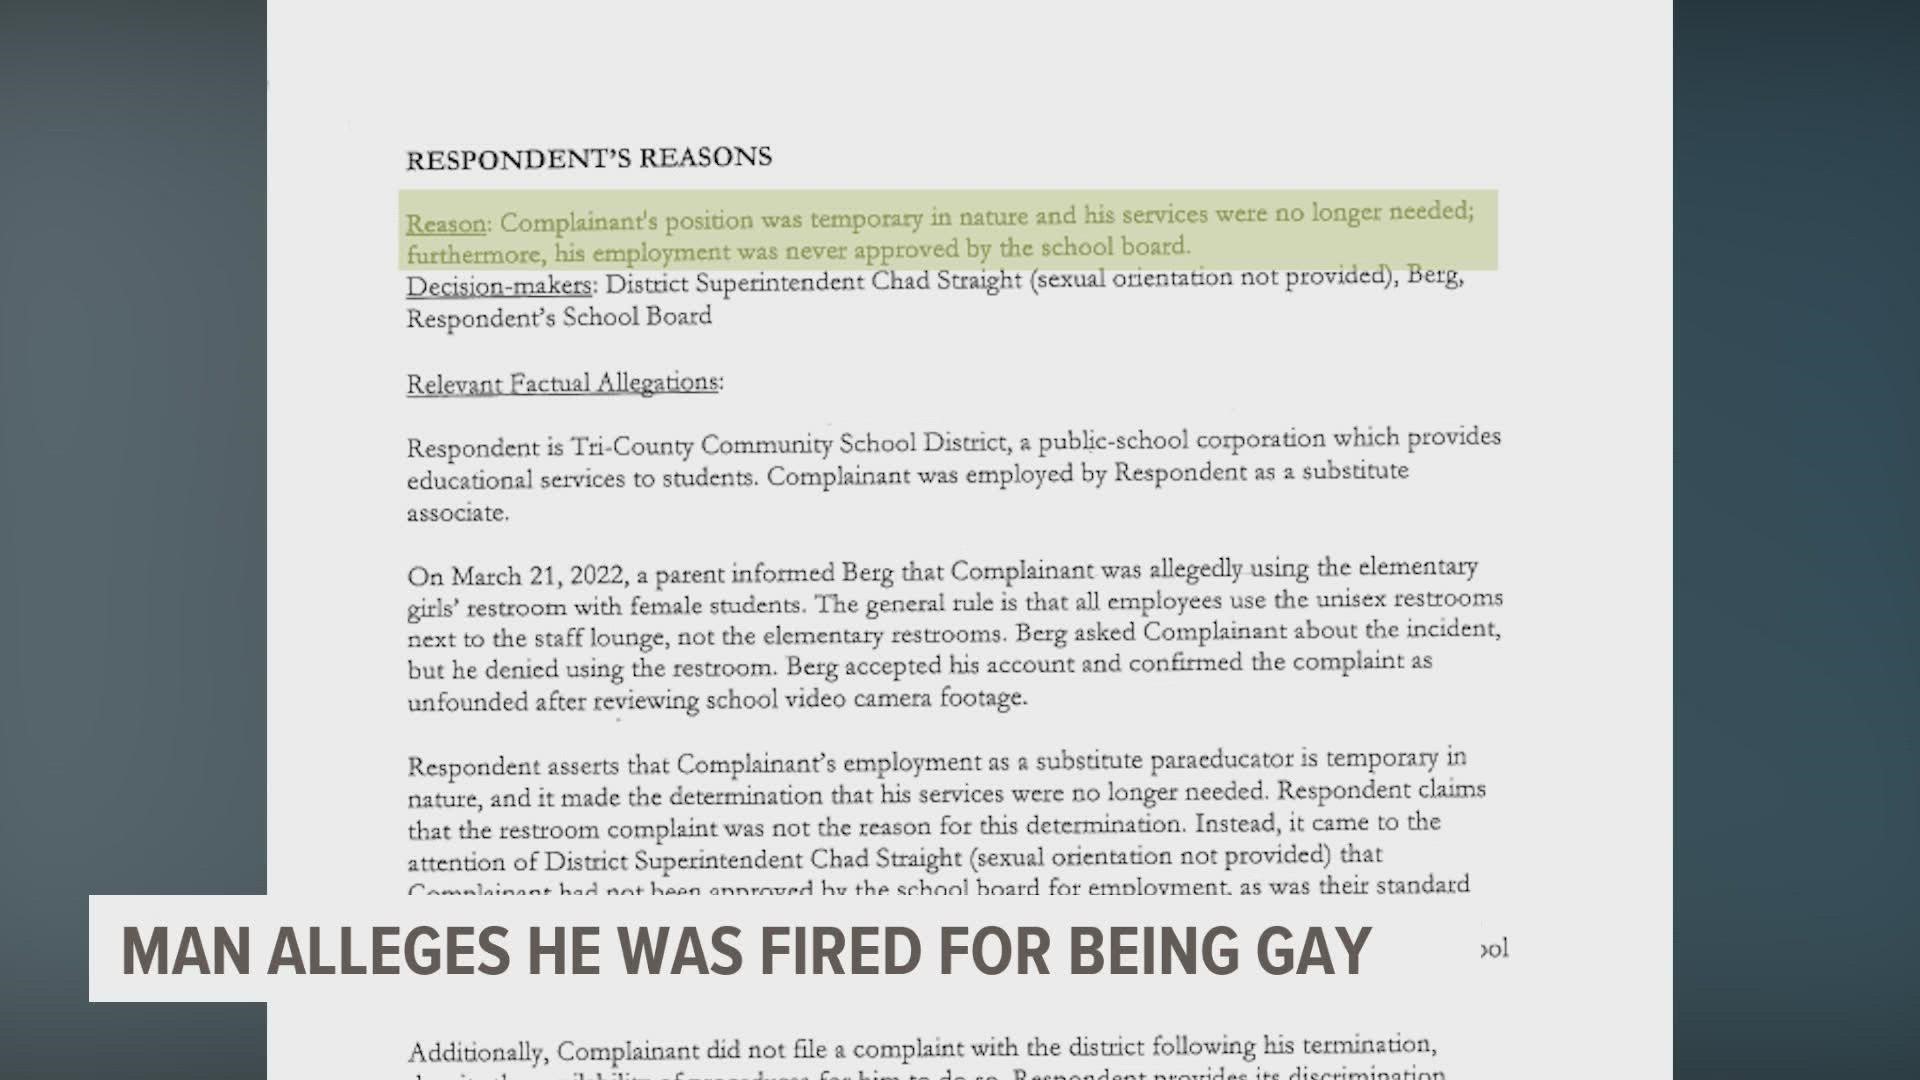 Attorney Ben Lynch says his client was fired in March 2022 for being gay. The school district claims the job was temporary and "his services were no longer needed."